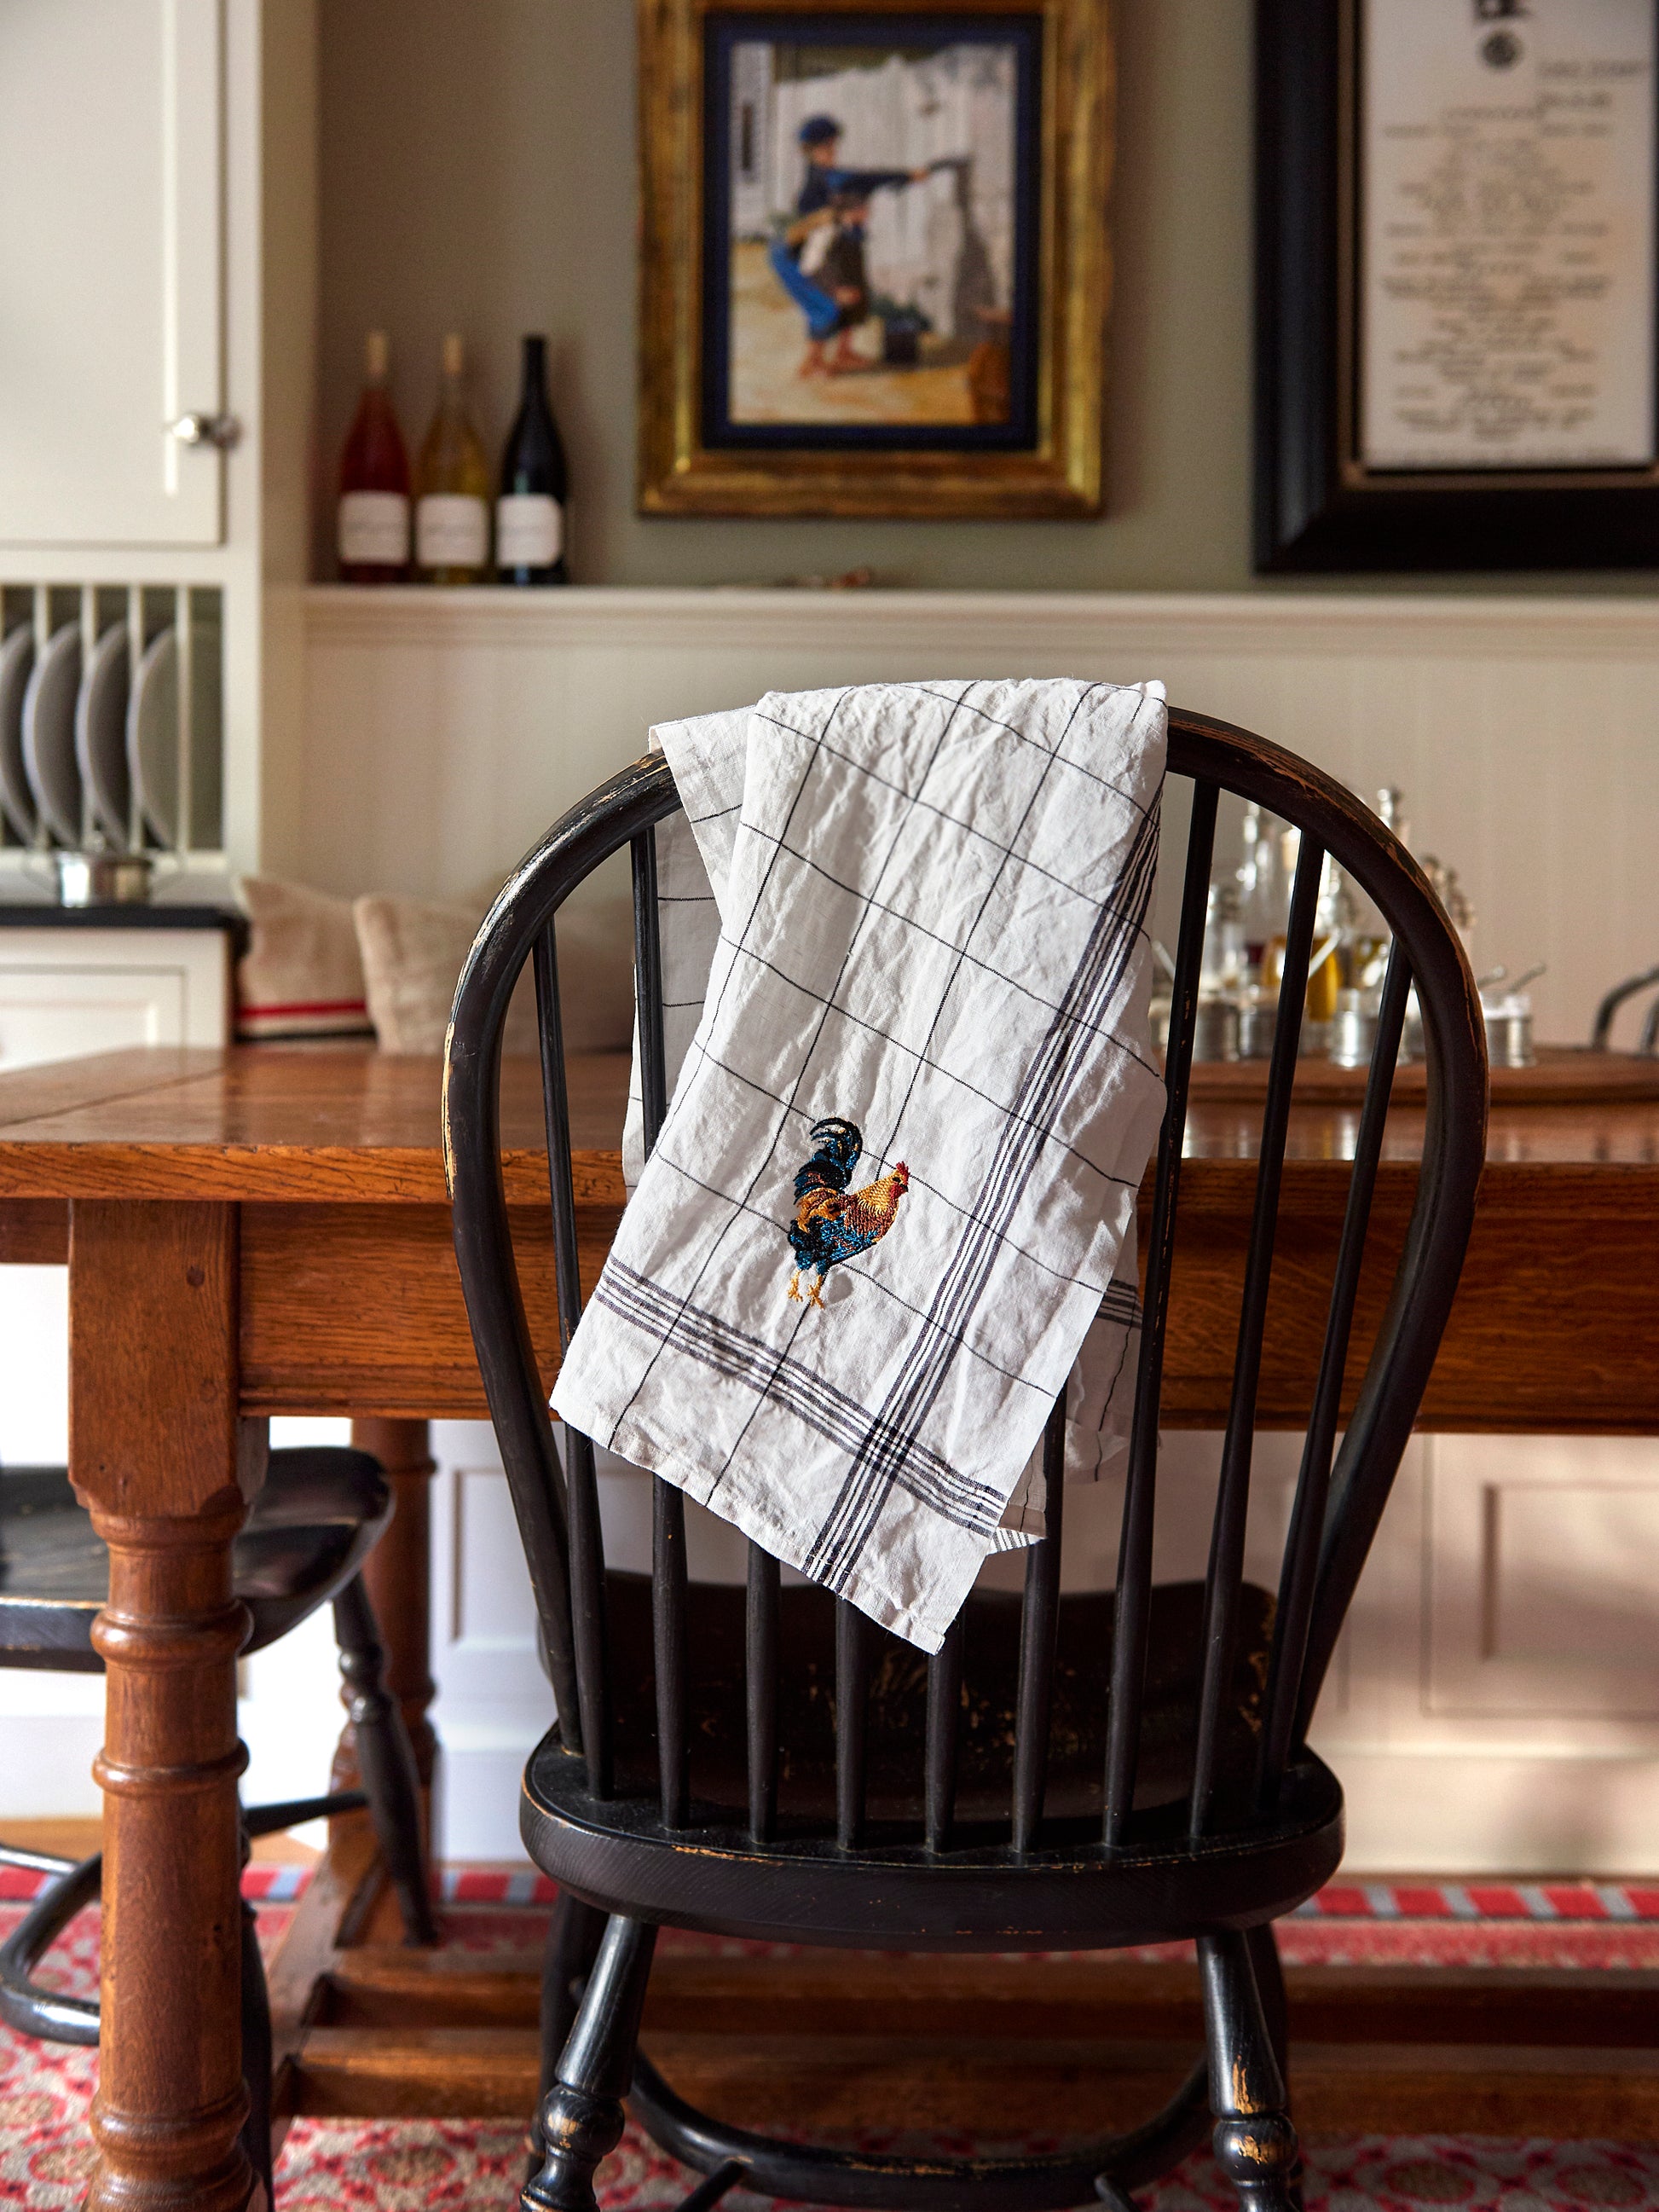 The Best Kitchen Towels Cost Less Than $1 Each, So Stock Up